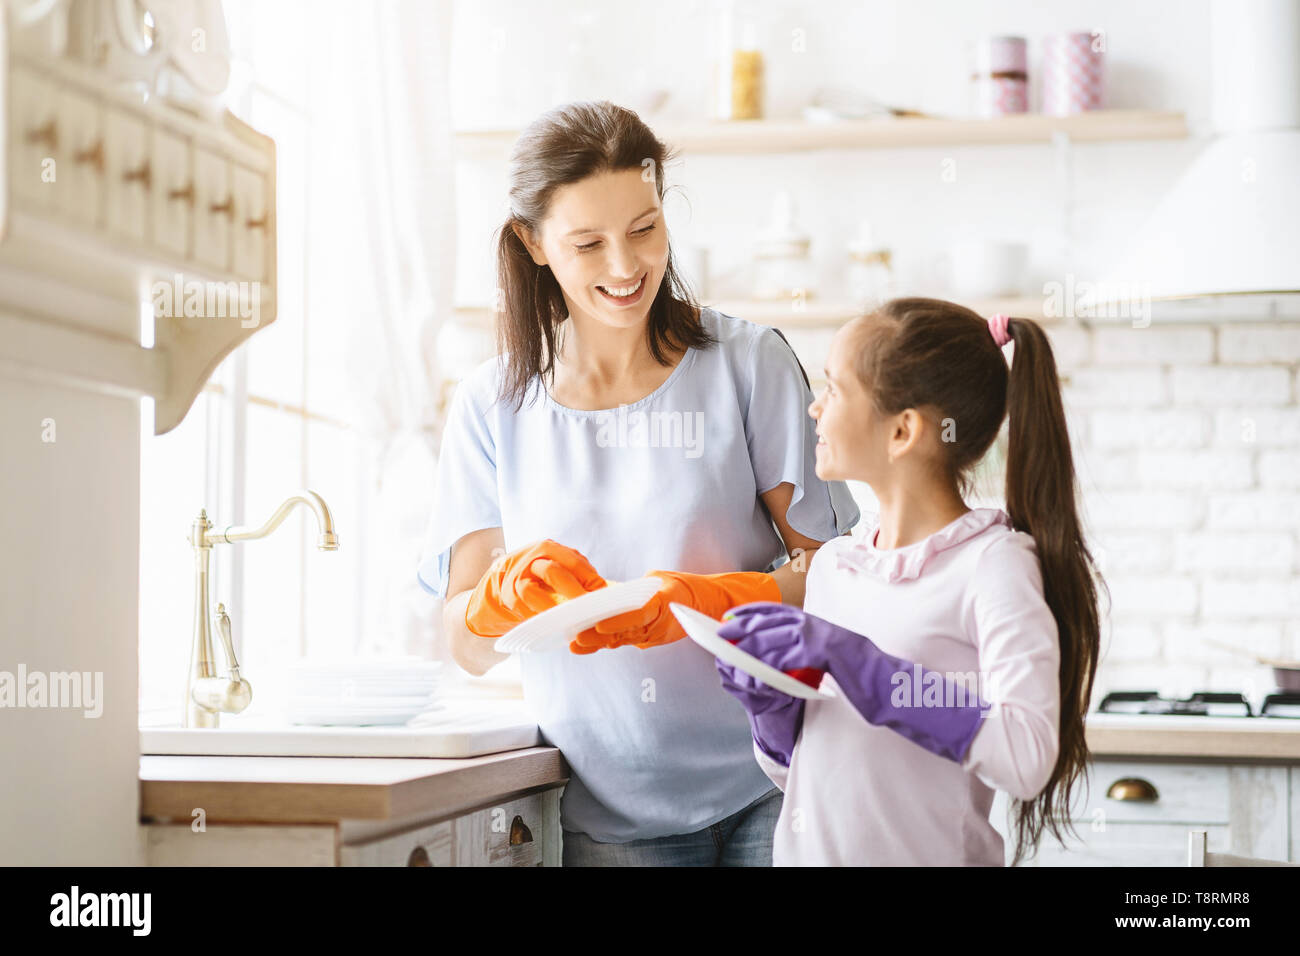 Helping hand. Cute teenage girl helping her mother in washing dishes at family kitchen Stock Photo